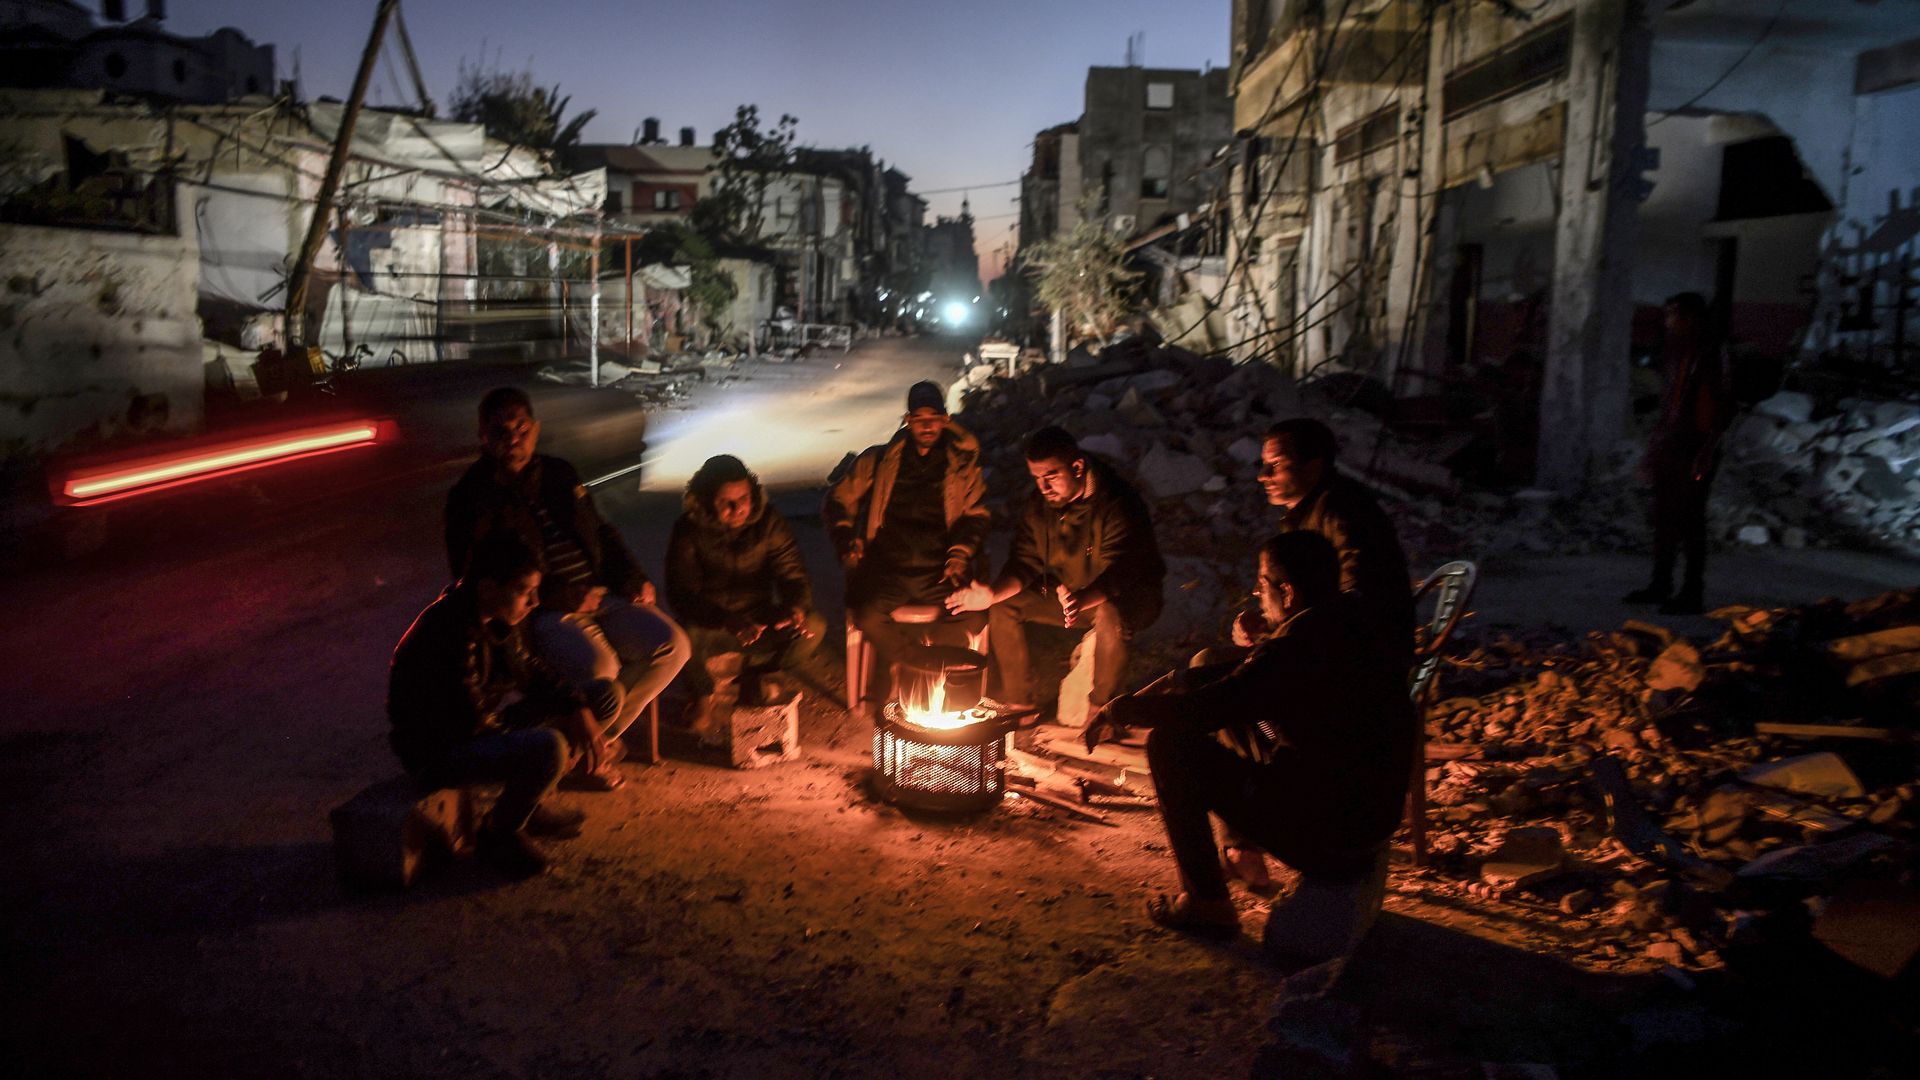 People gather around a fire near the rubble of a building in war-torn Gaza.